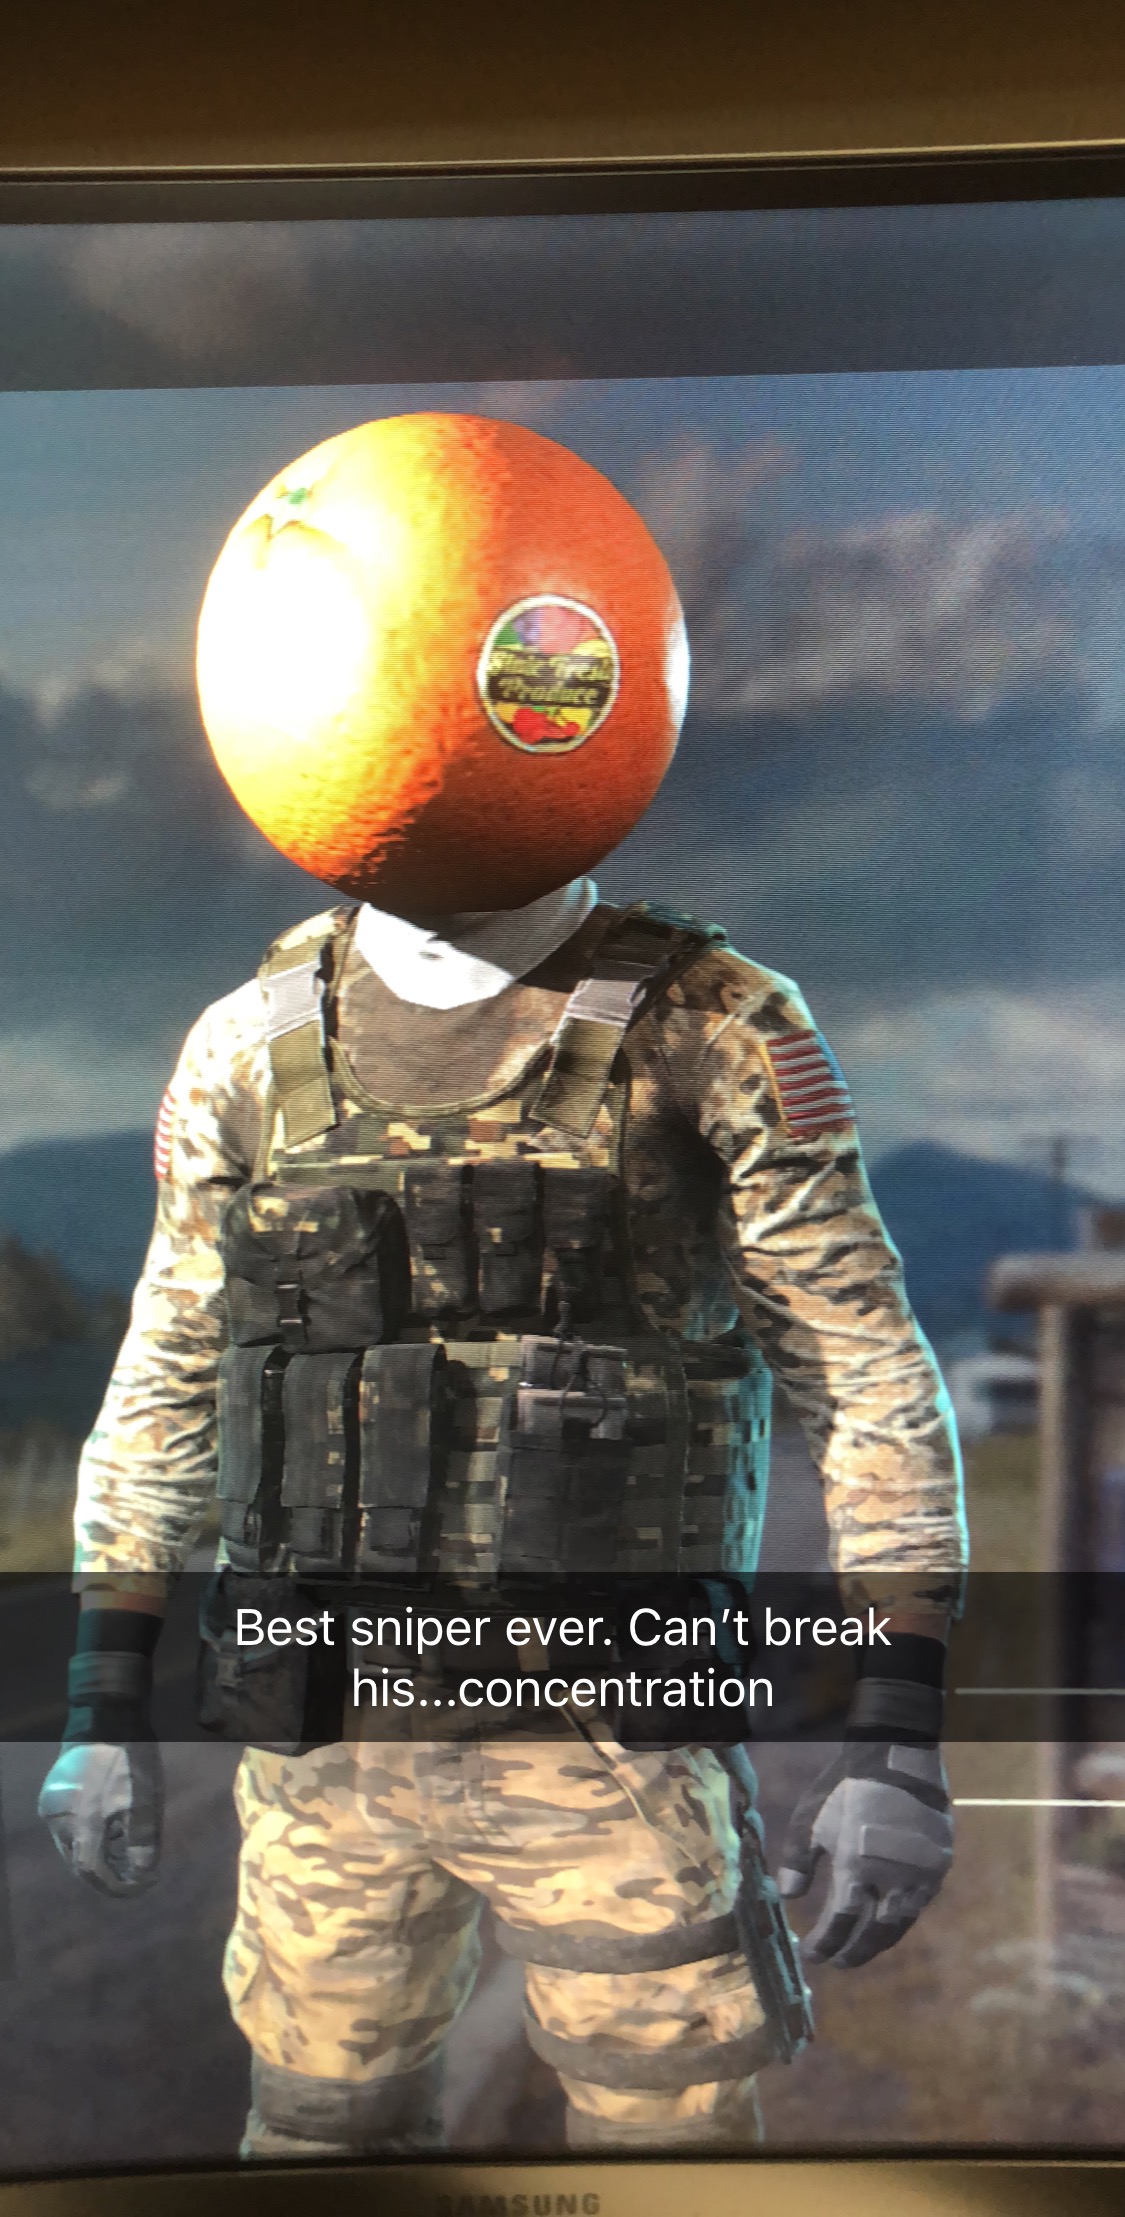 dank fire meme of poster - Best sniper ever. Can't break his...concentration